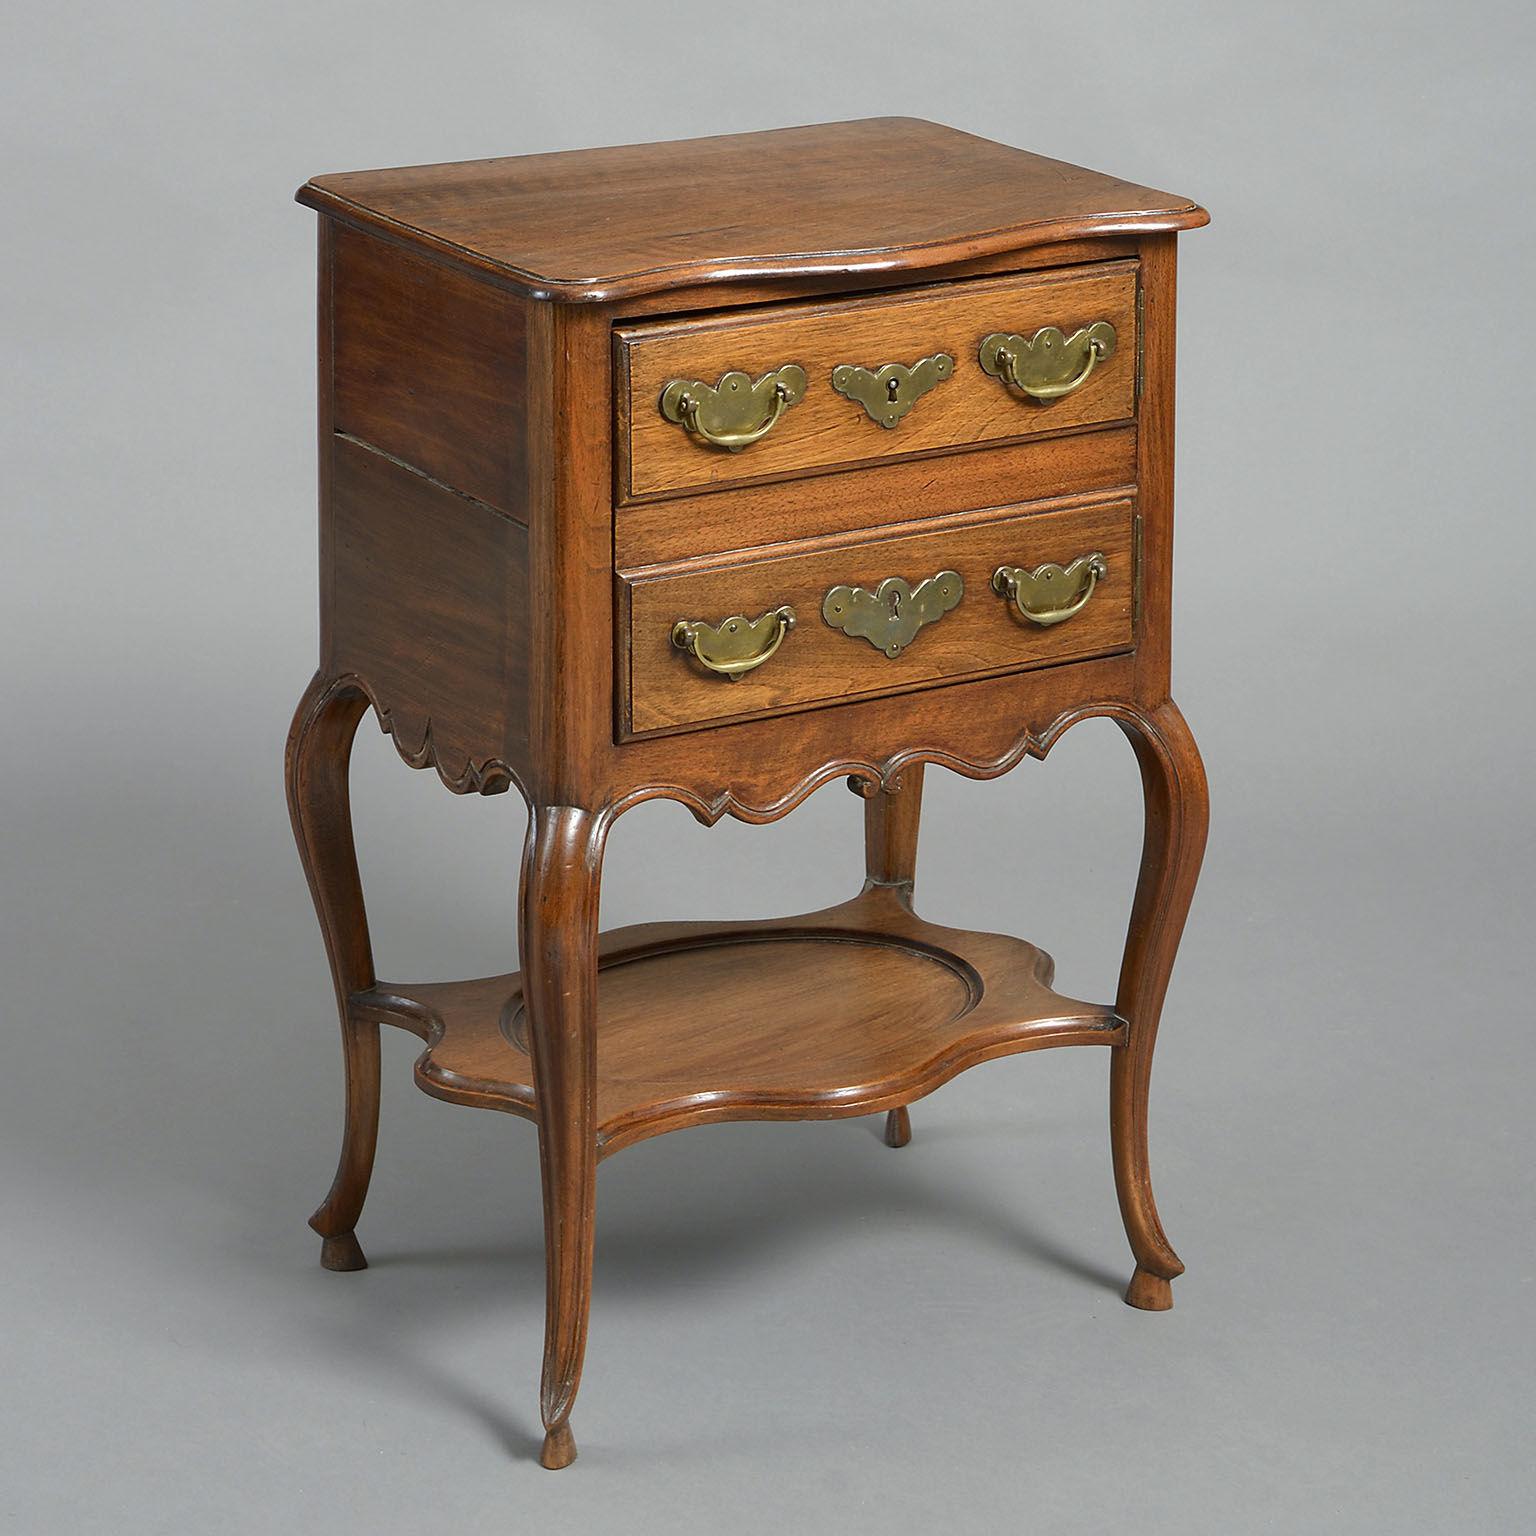 Spanish Pair of 18th Century Walnut and Chestnut Bedside Tables